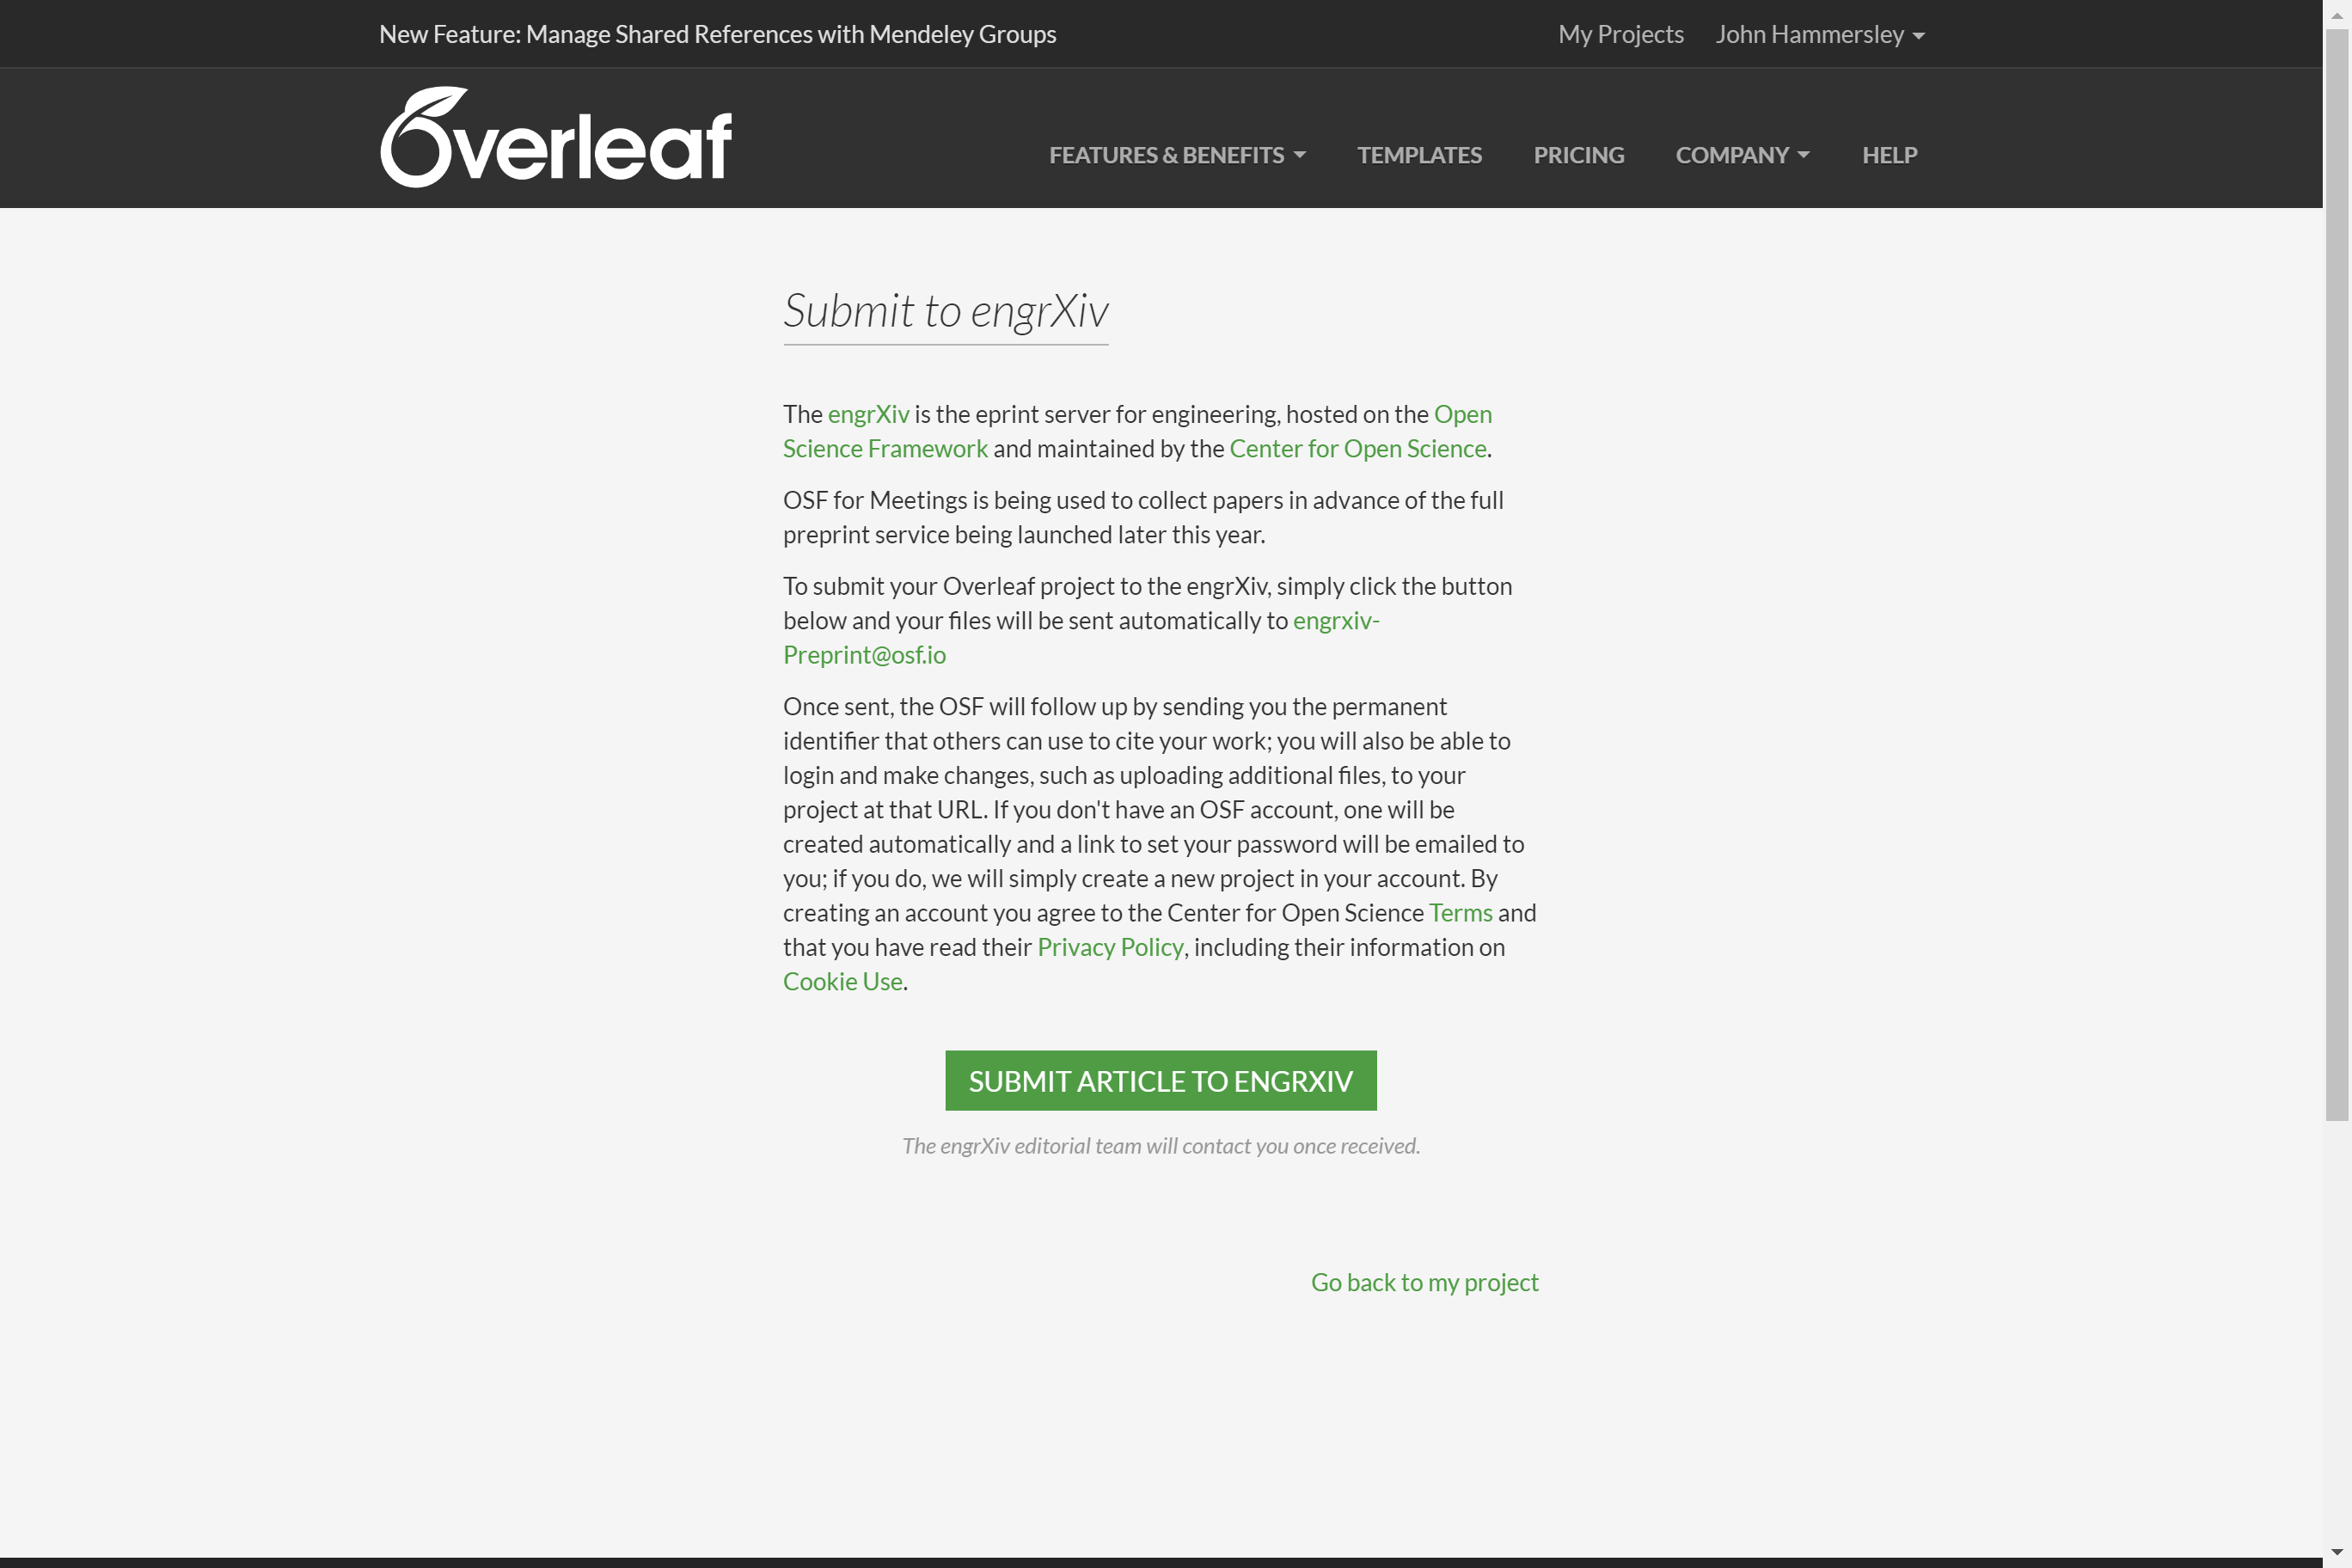 submit-to-engrxiv-on-overleaf.png